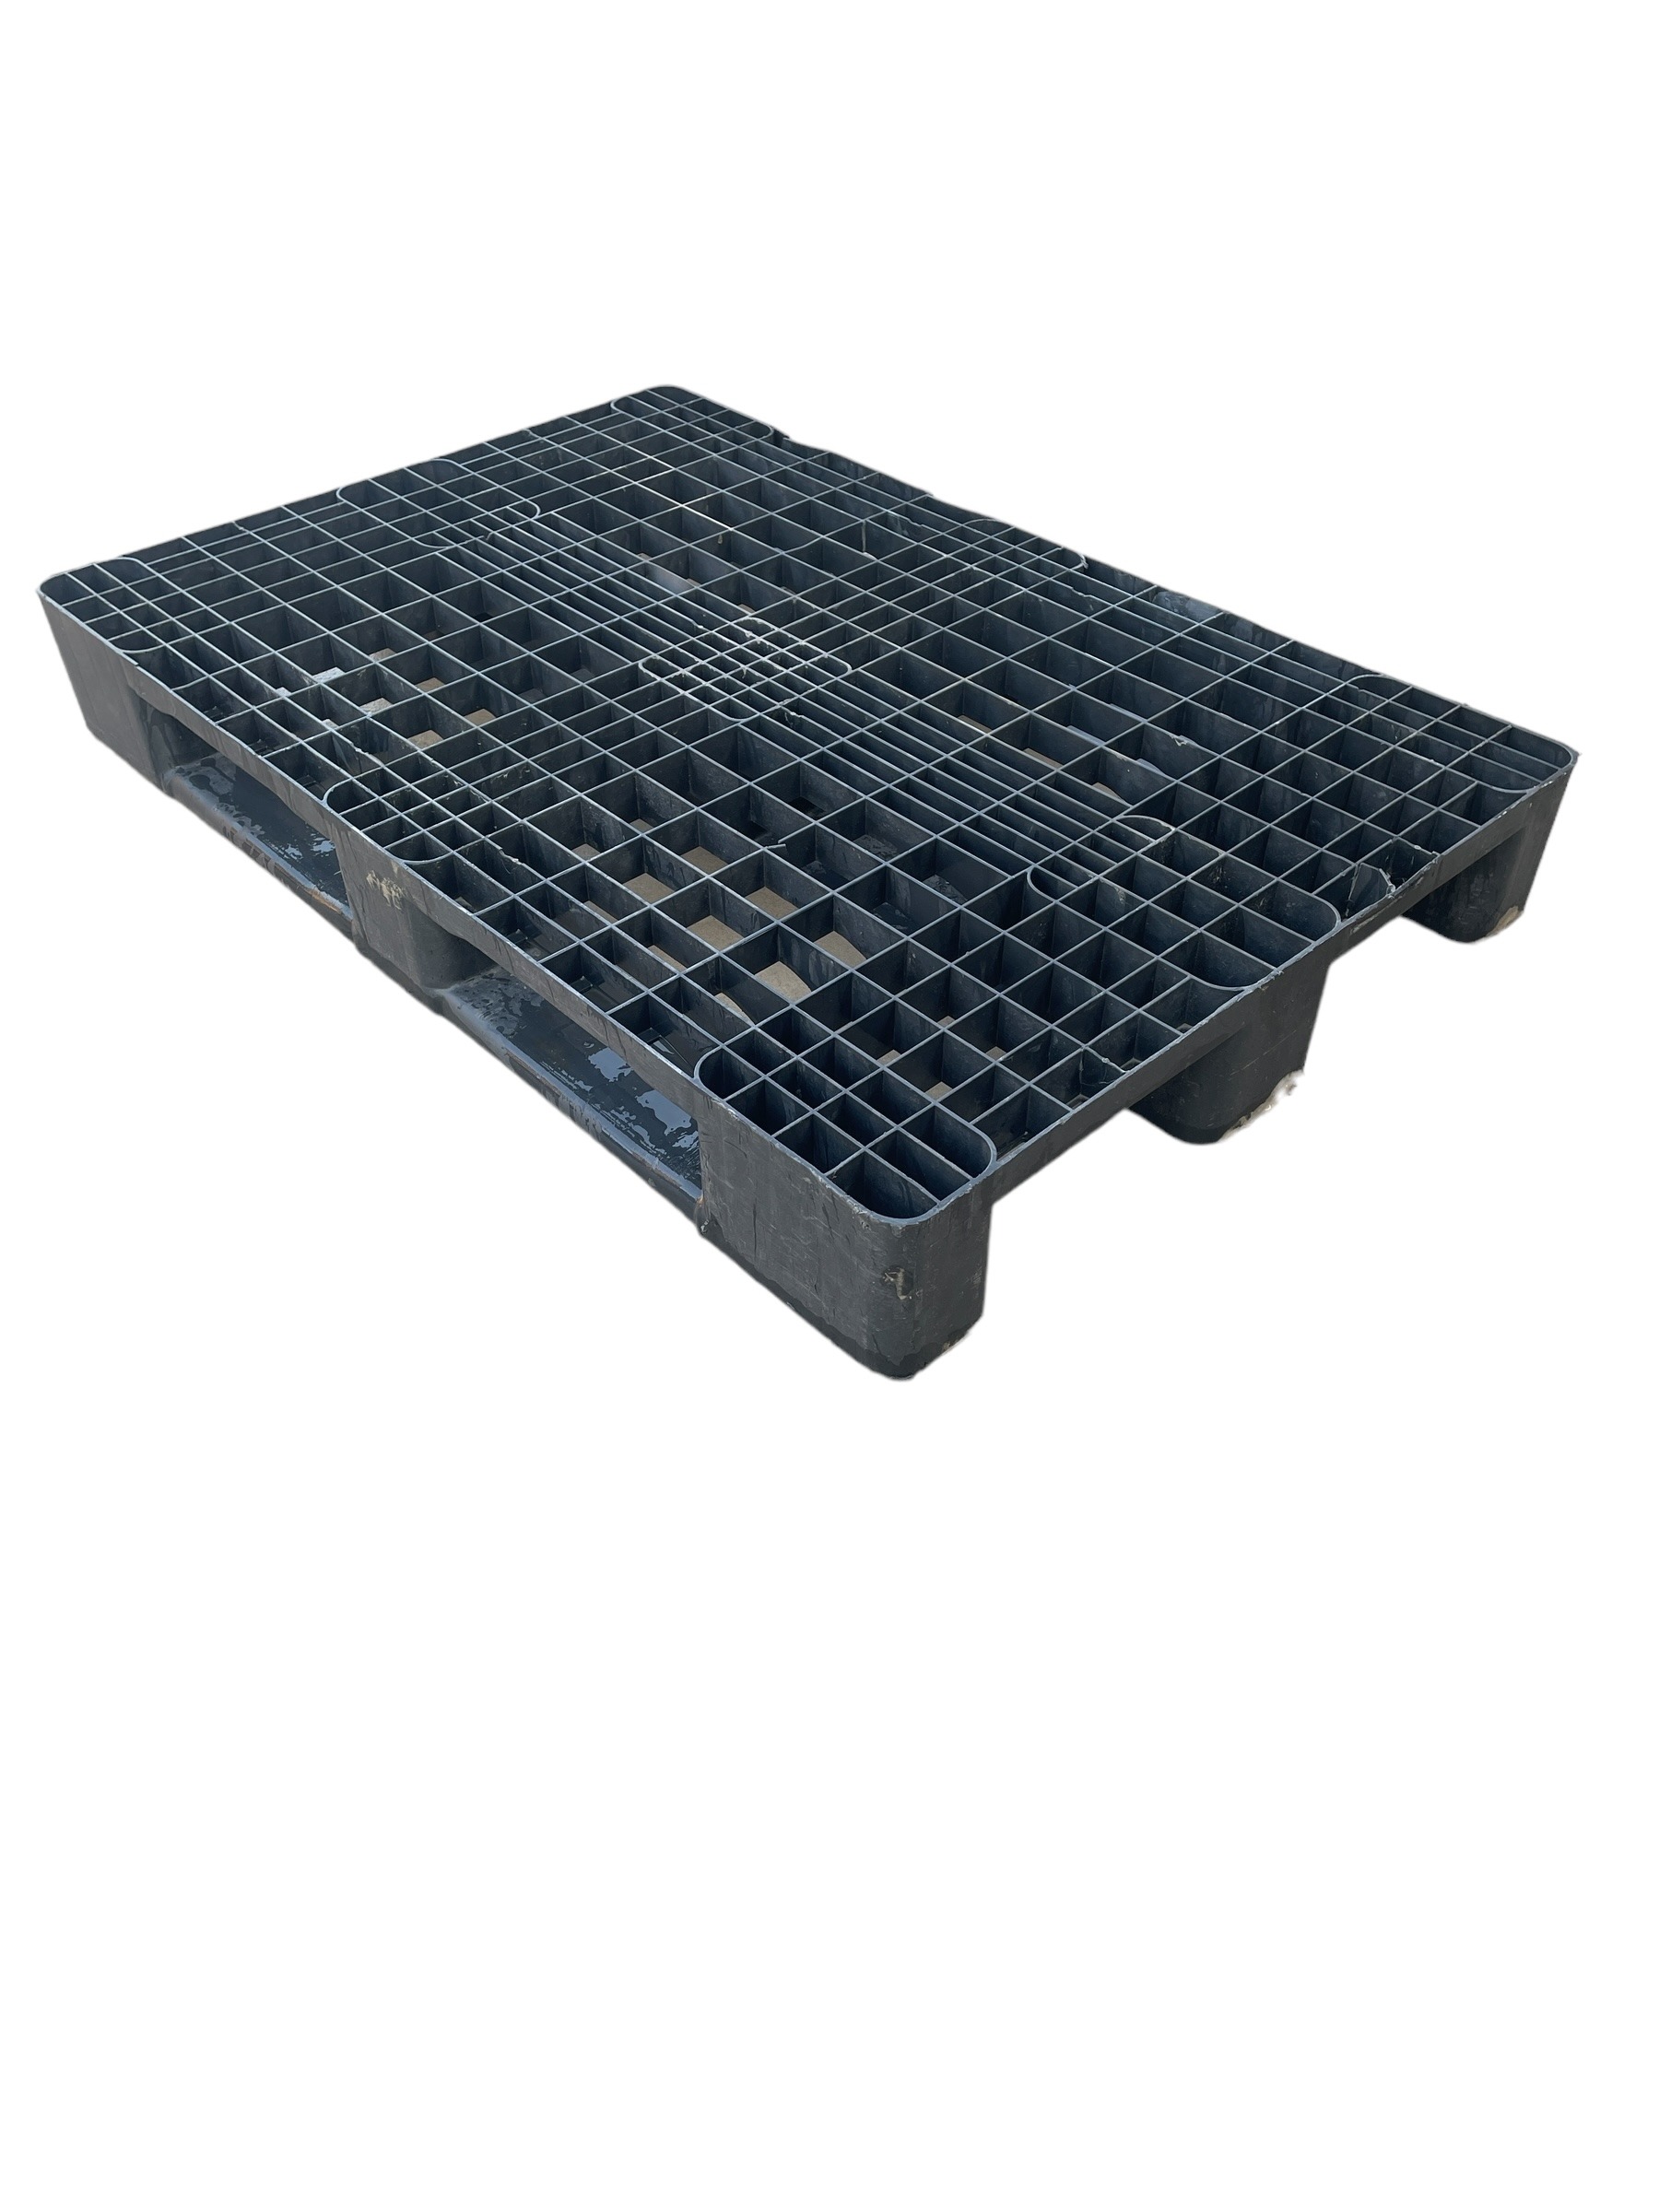 Buy quality new and used pallets